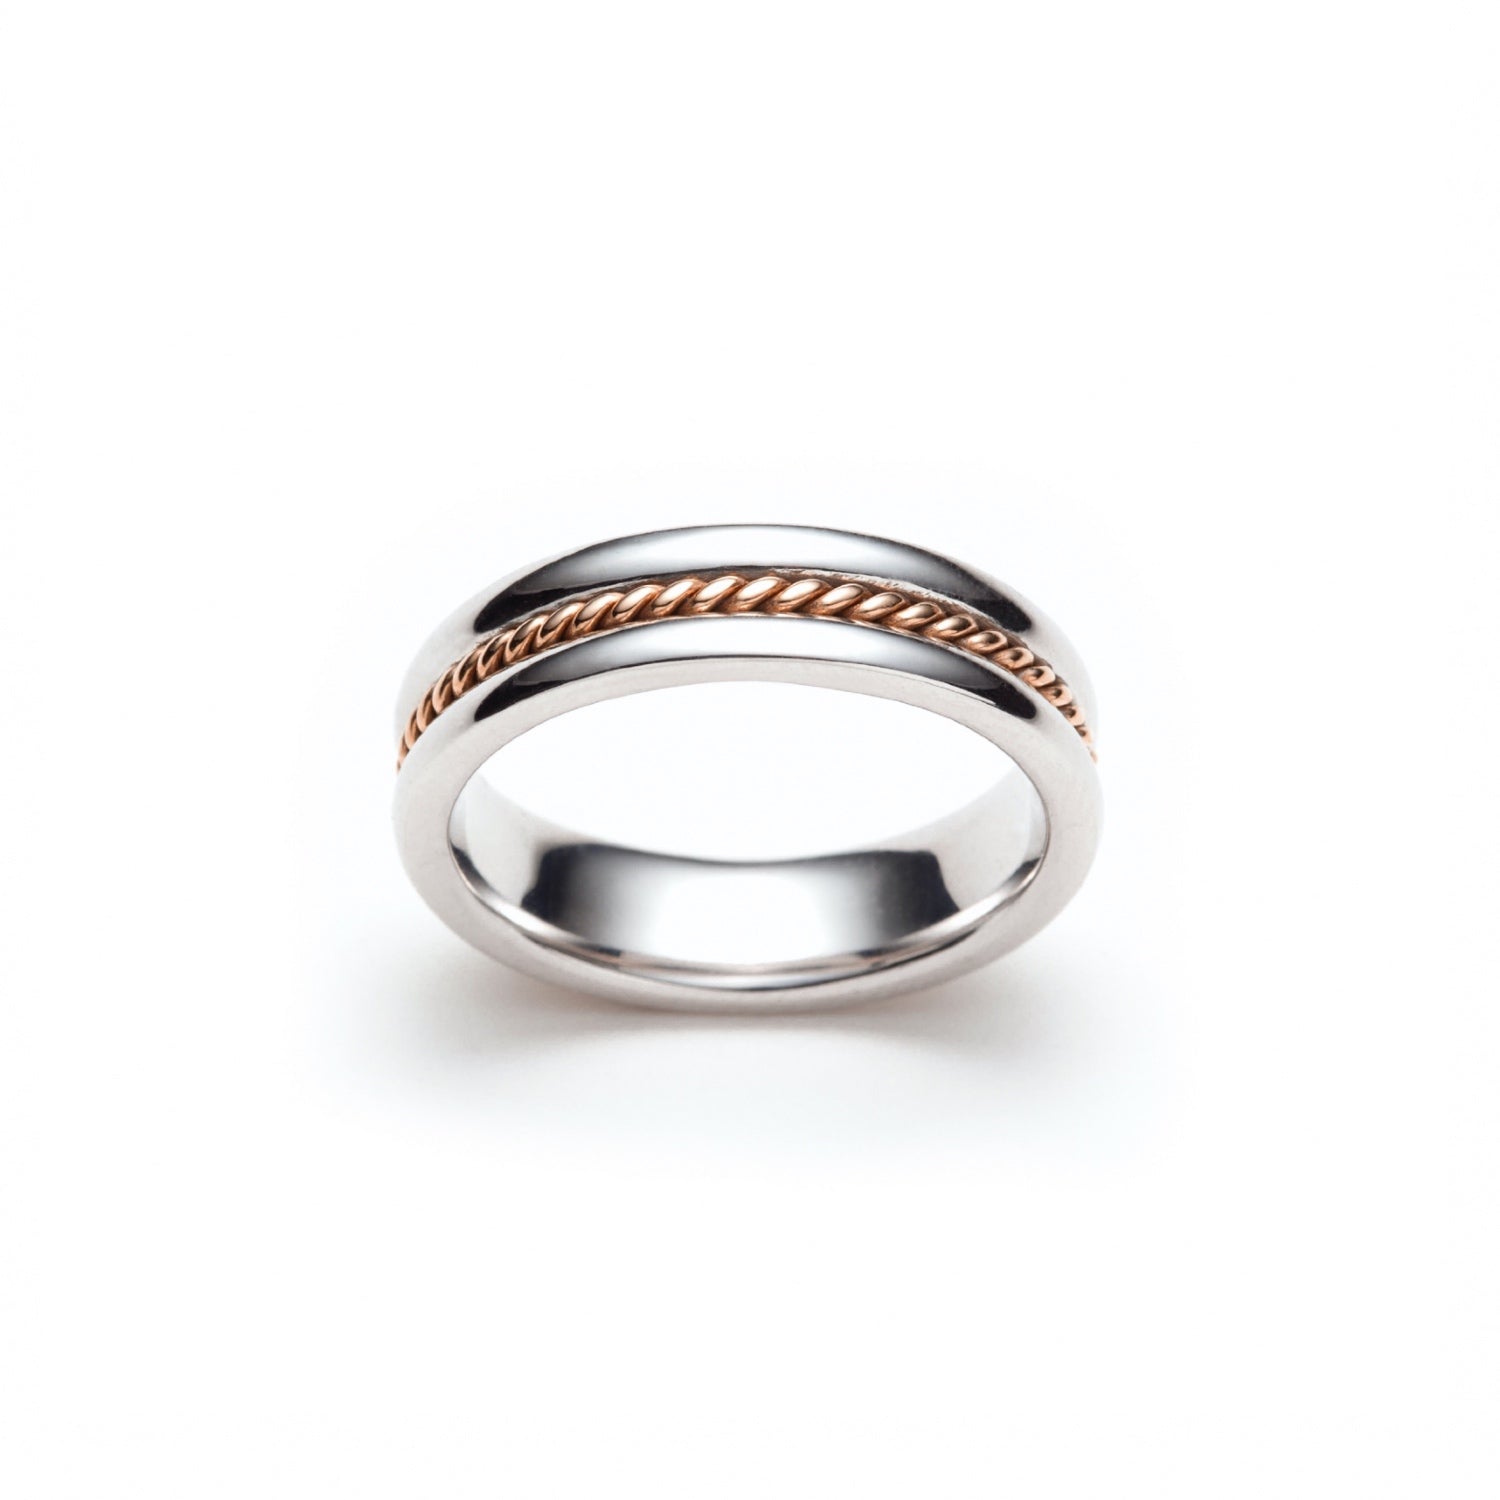 Narrow Twist Polished Finish 6-7 mm Mixed Metal Wedding Band in Rose and White Gold